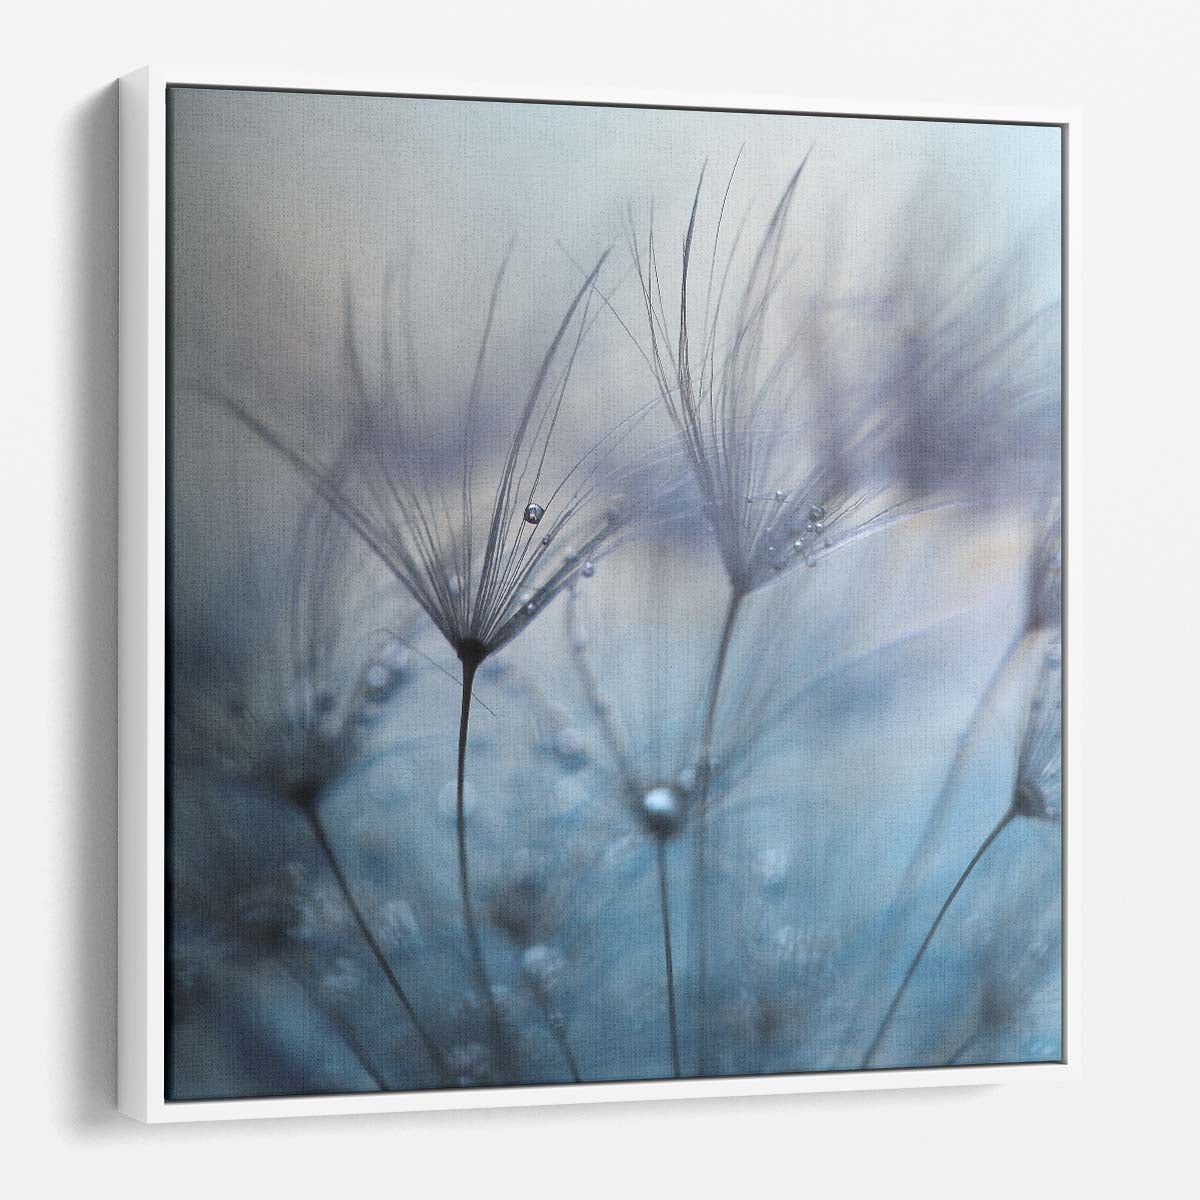 Delicate Dandelion Dew Drops Floral Macro Photography Wall Art by Luxuriance Designs. Made in USA.